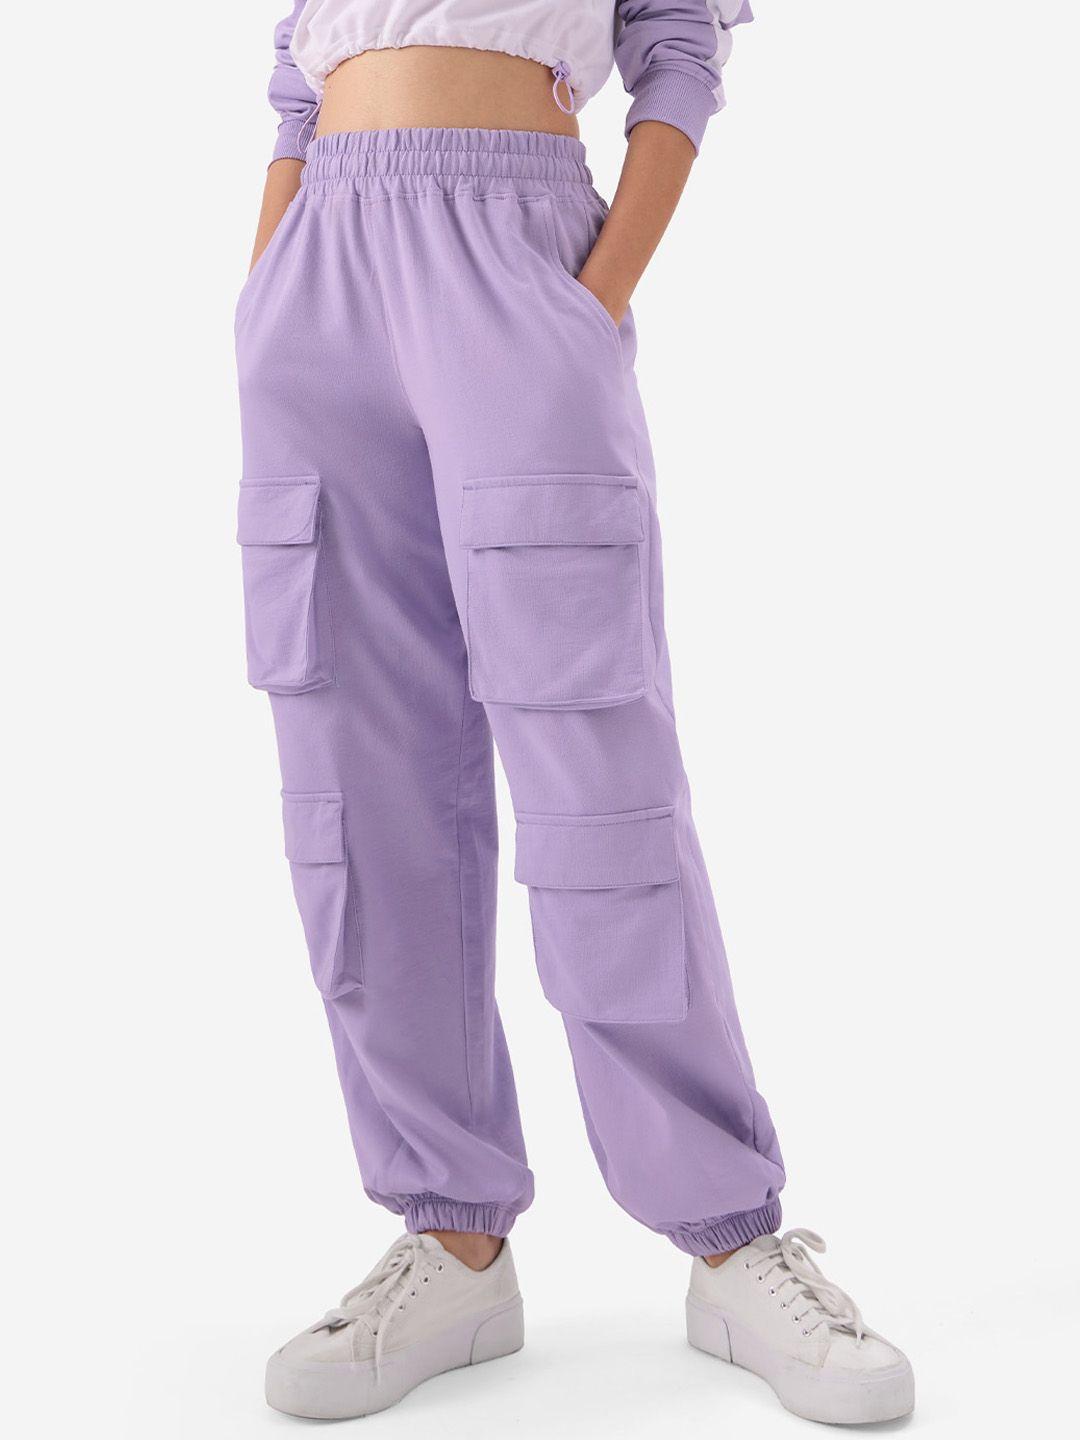 the souled store women pure cotton joggers